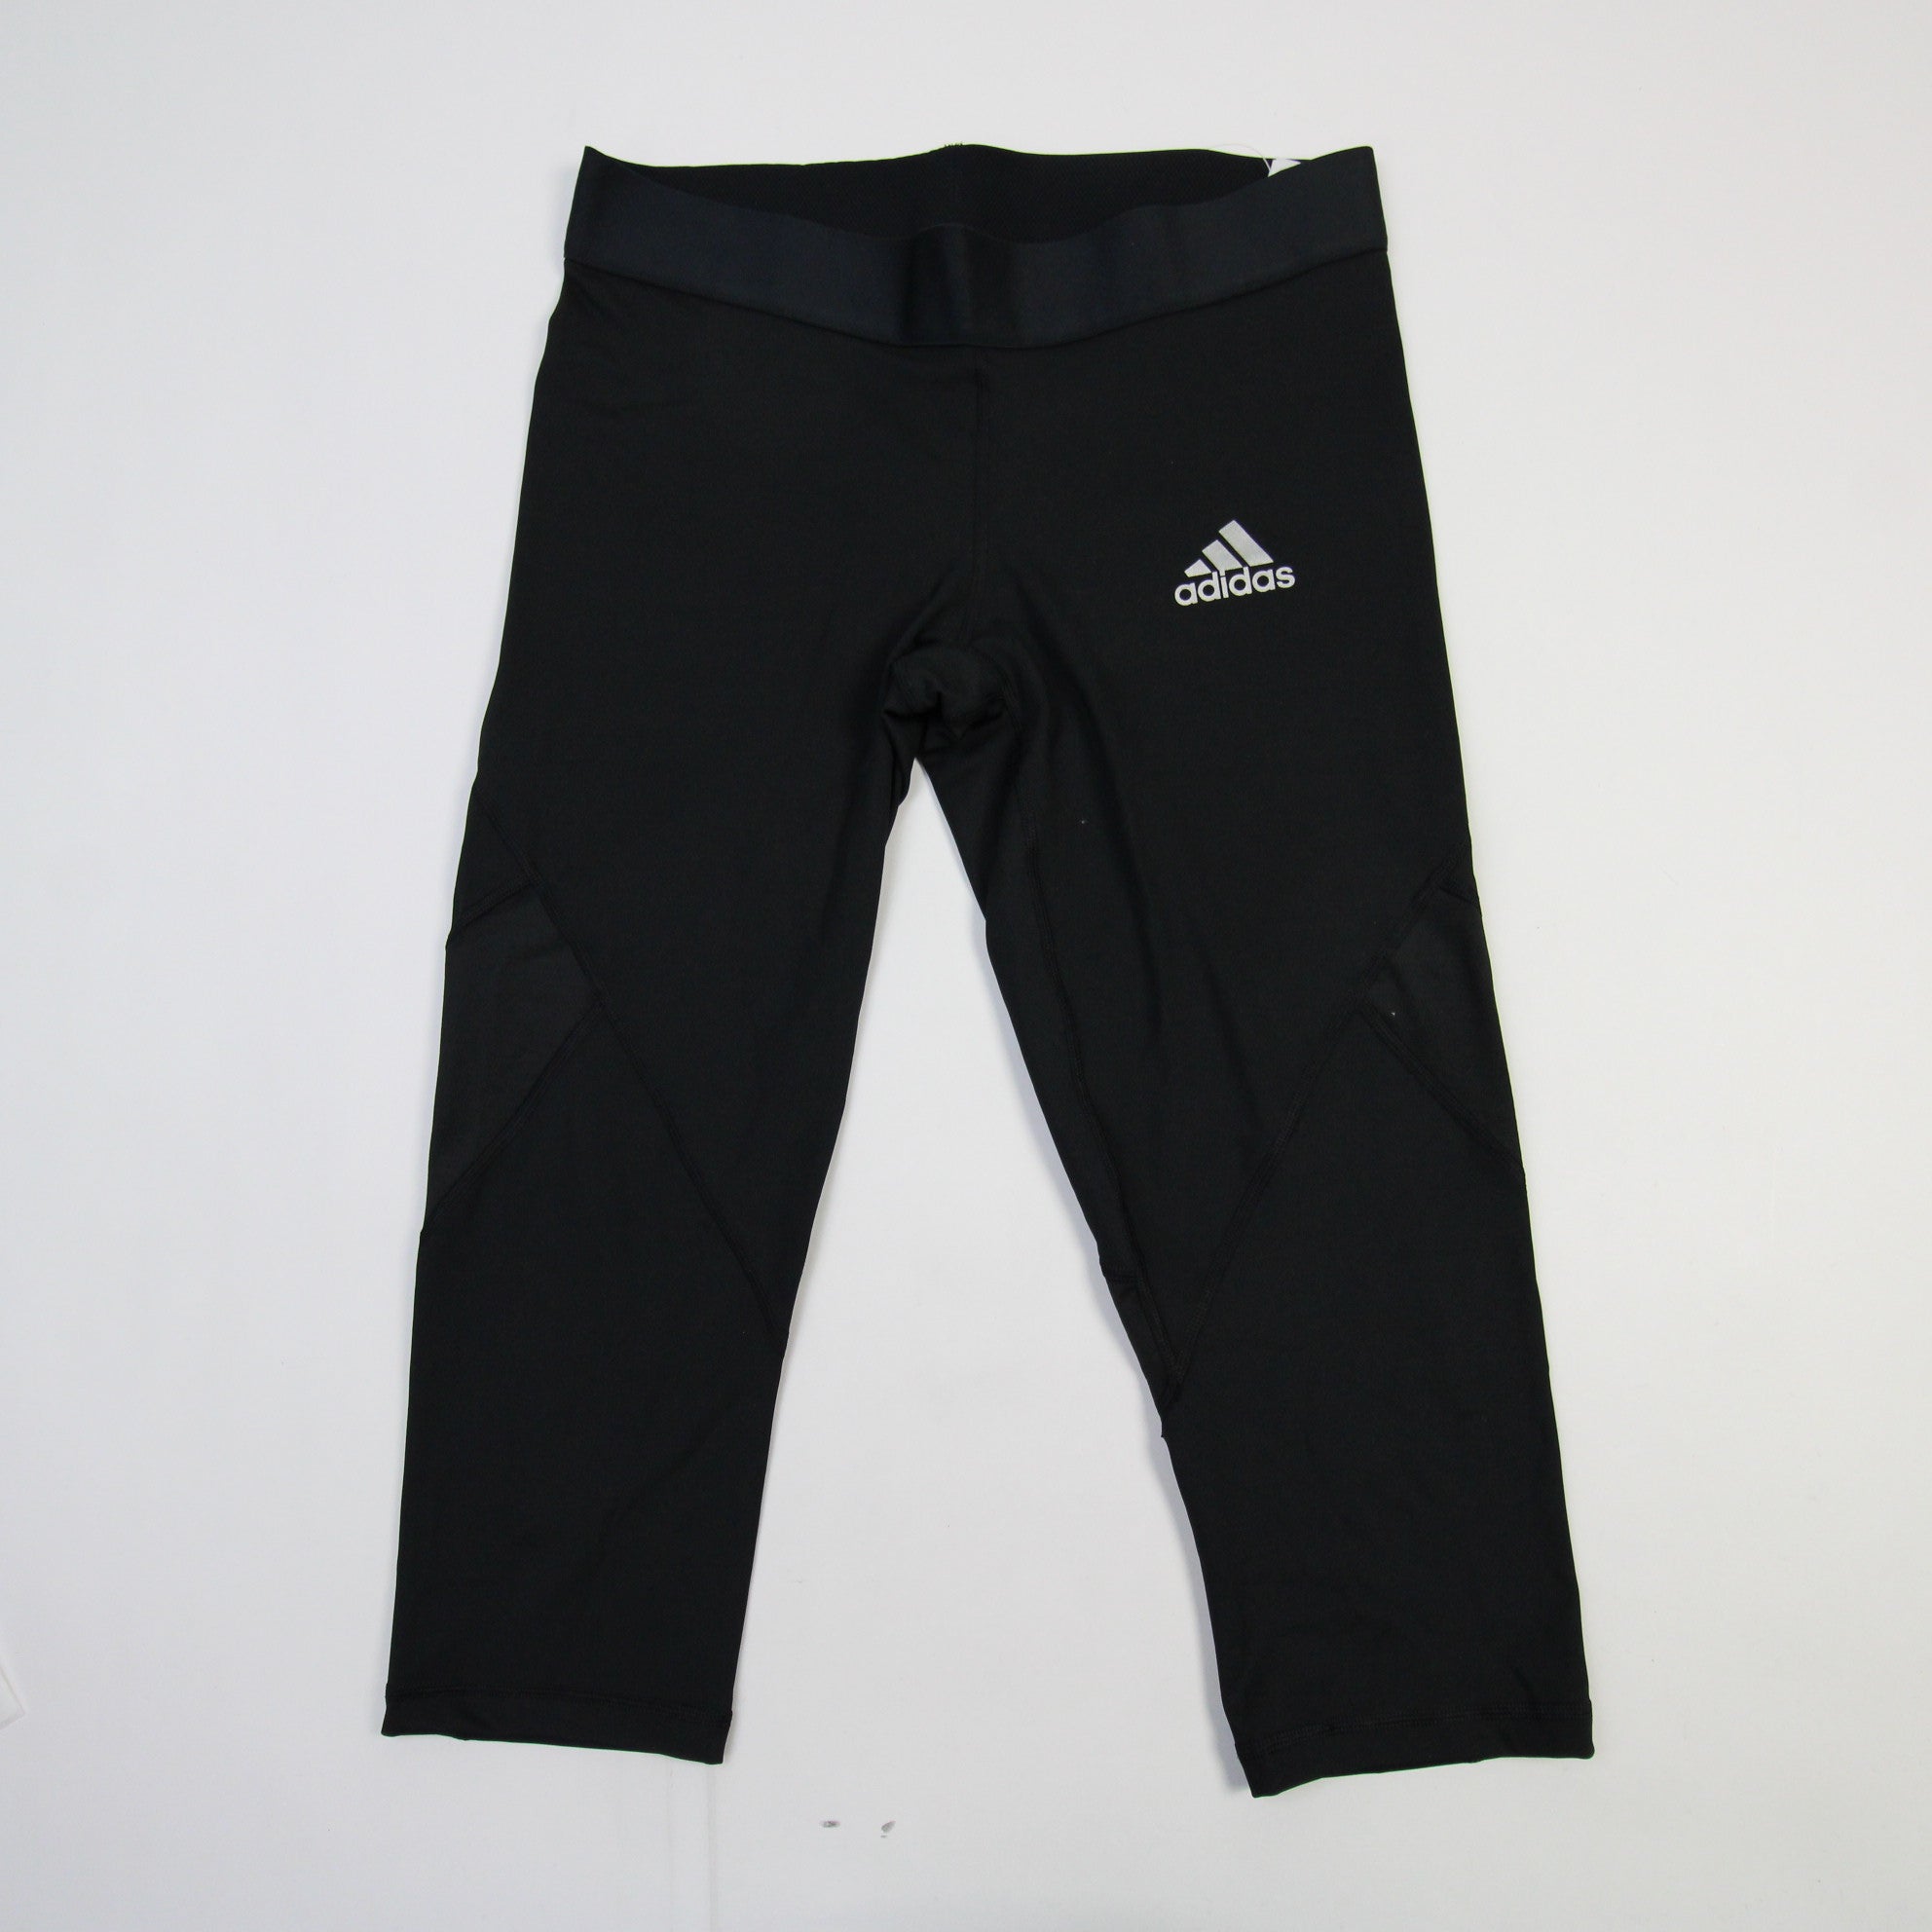 adidas Climacool Running Tights Women's Black New with Tags XS